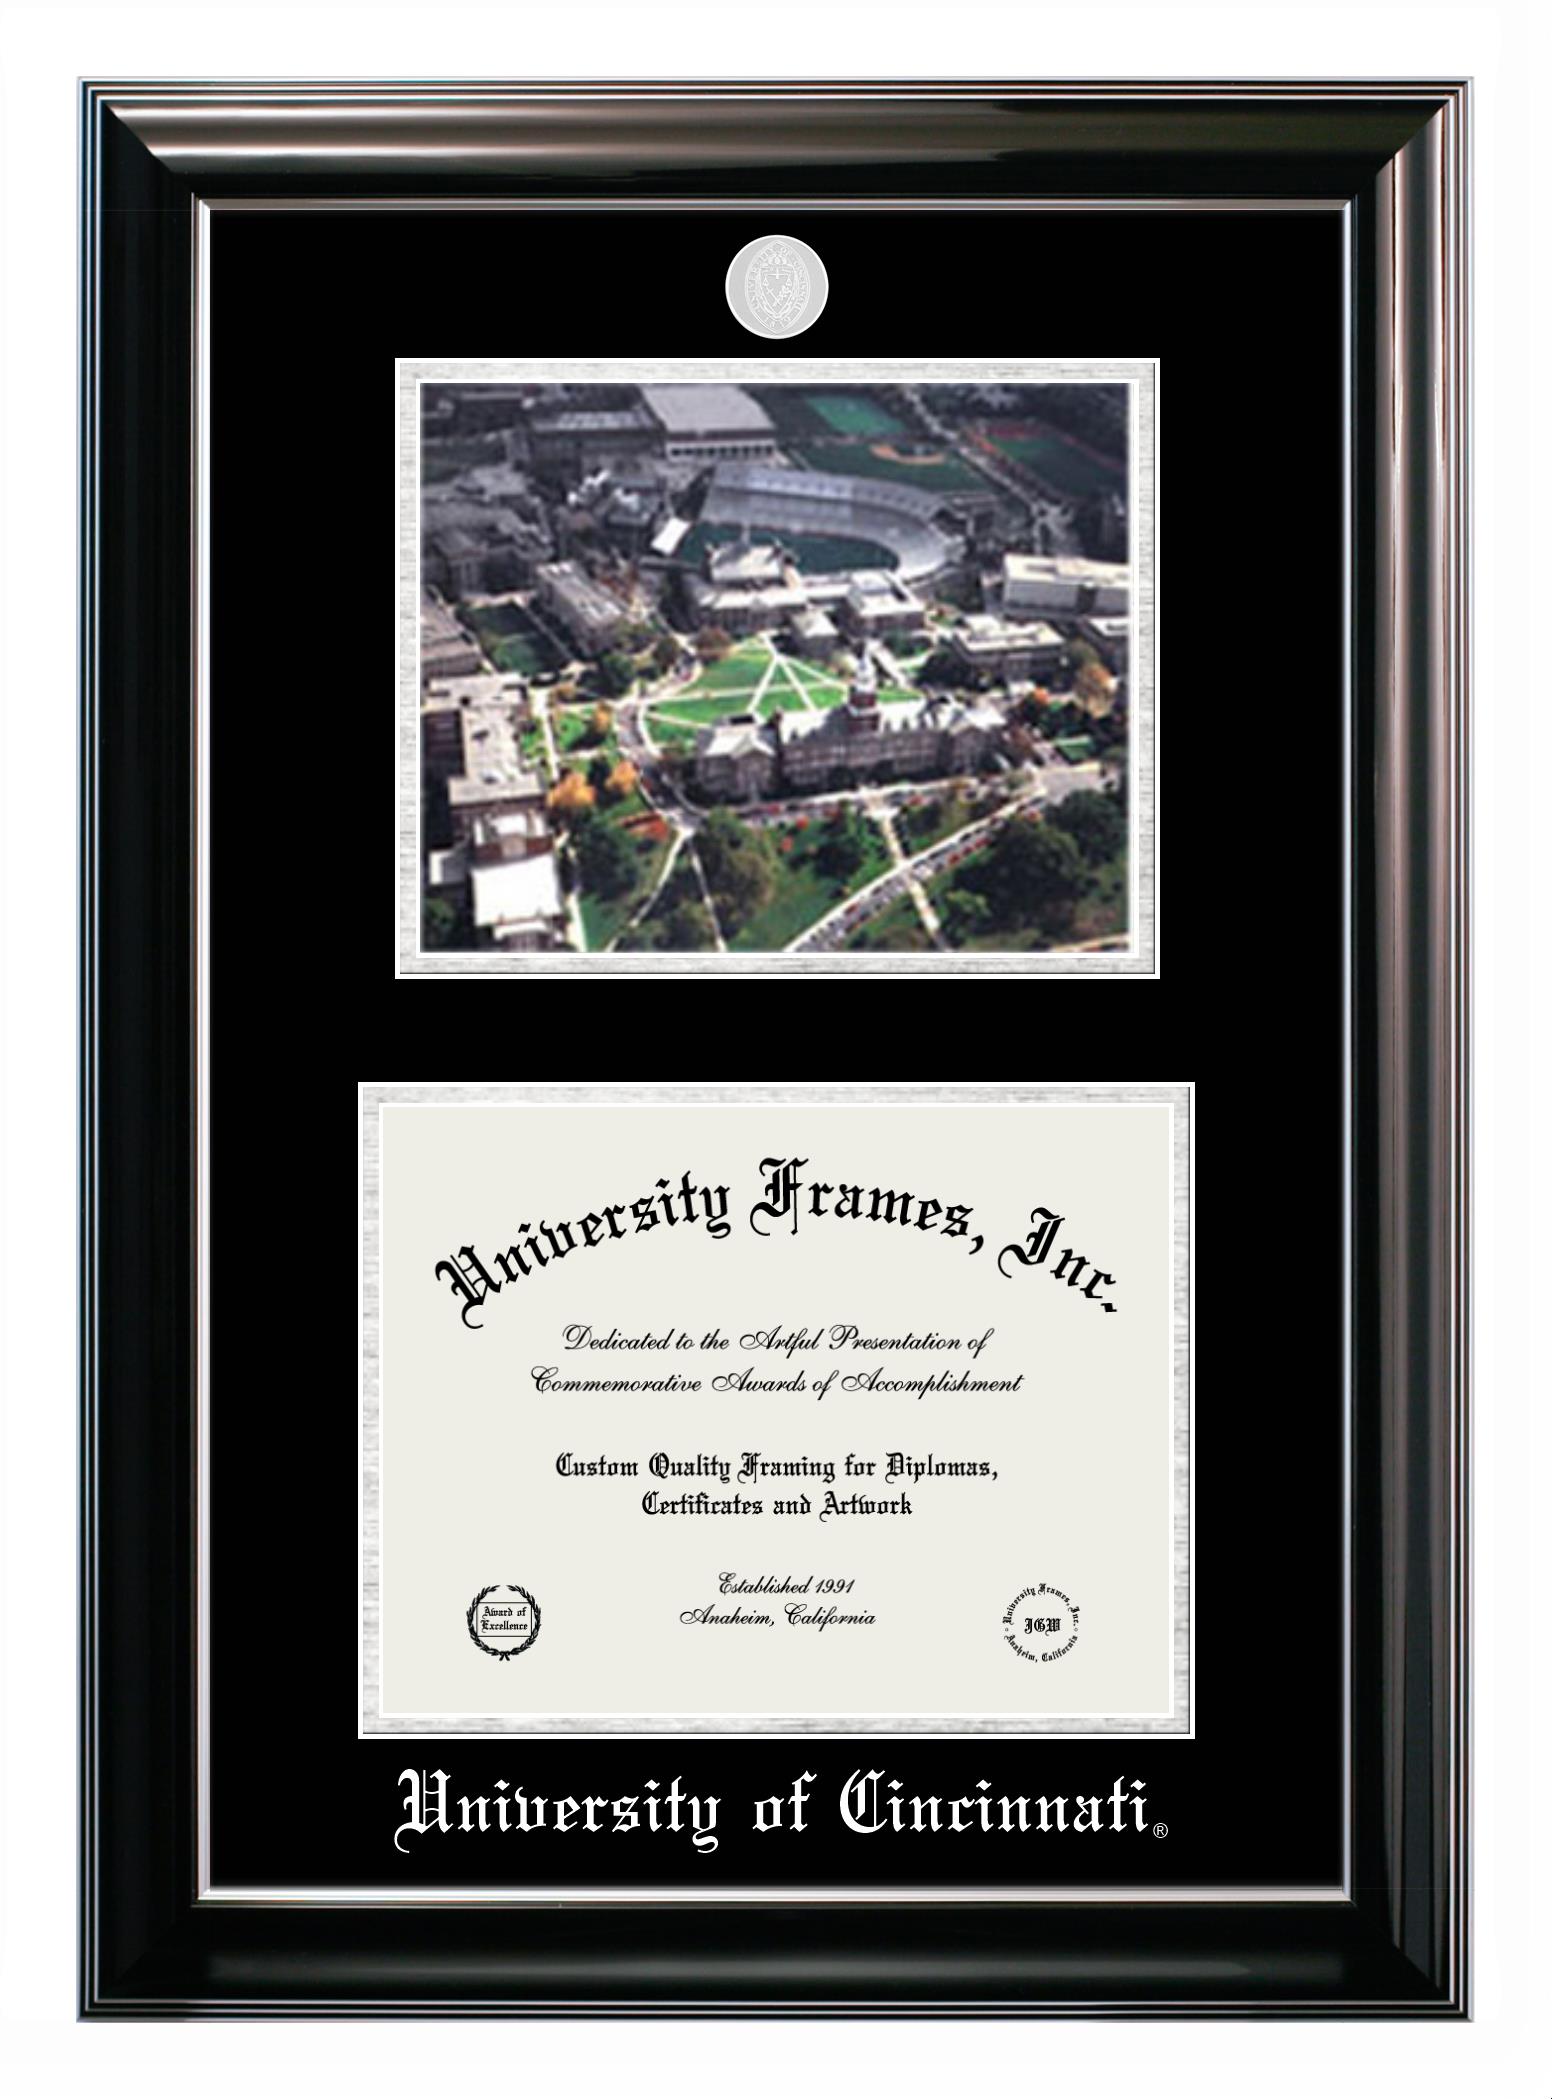 University Of Cincinnati Double Opening With Campus Image (Stacked) Frame In Classic Ebony With Silver Trim With Black & Silver Mats